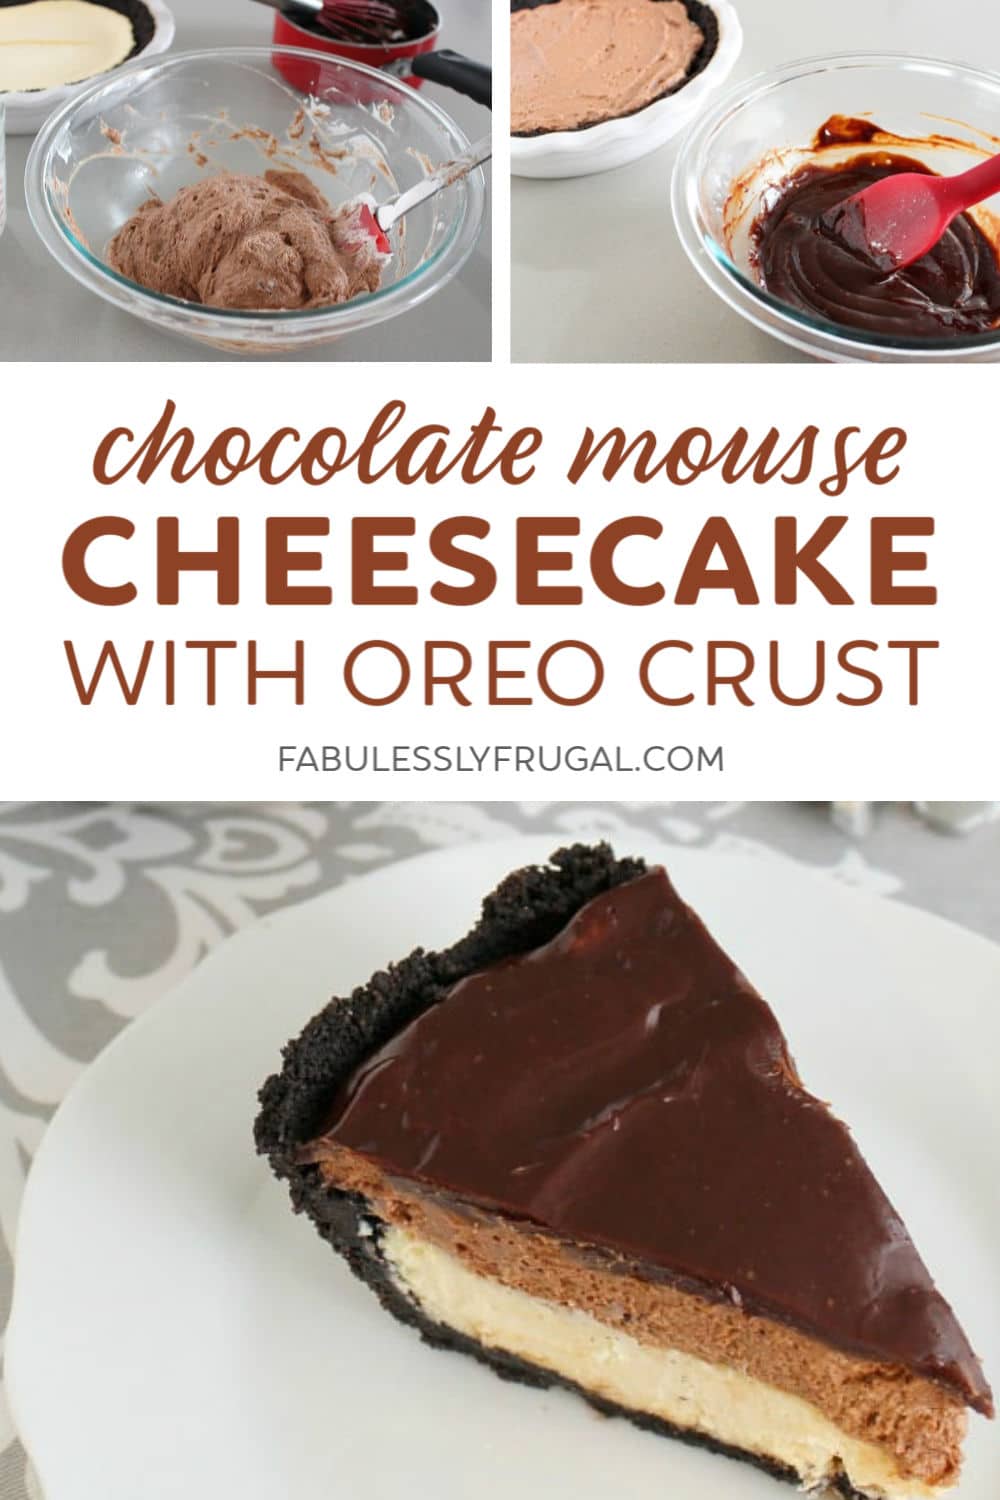 Chocolate mousse cheesecake with oreo crust